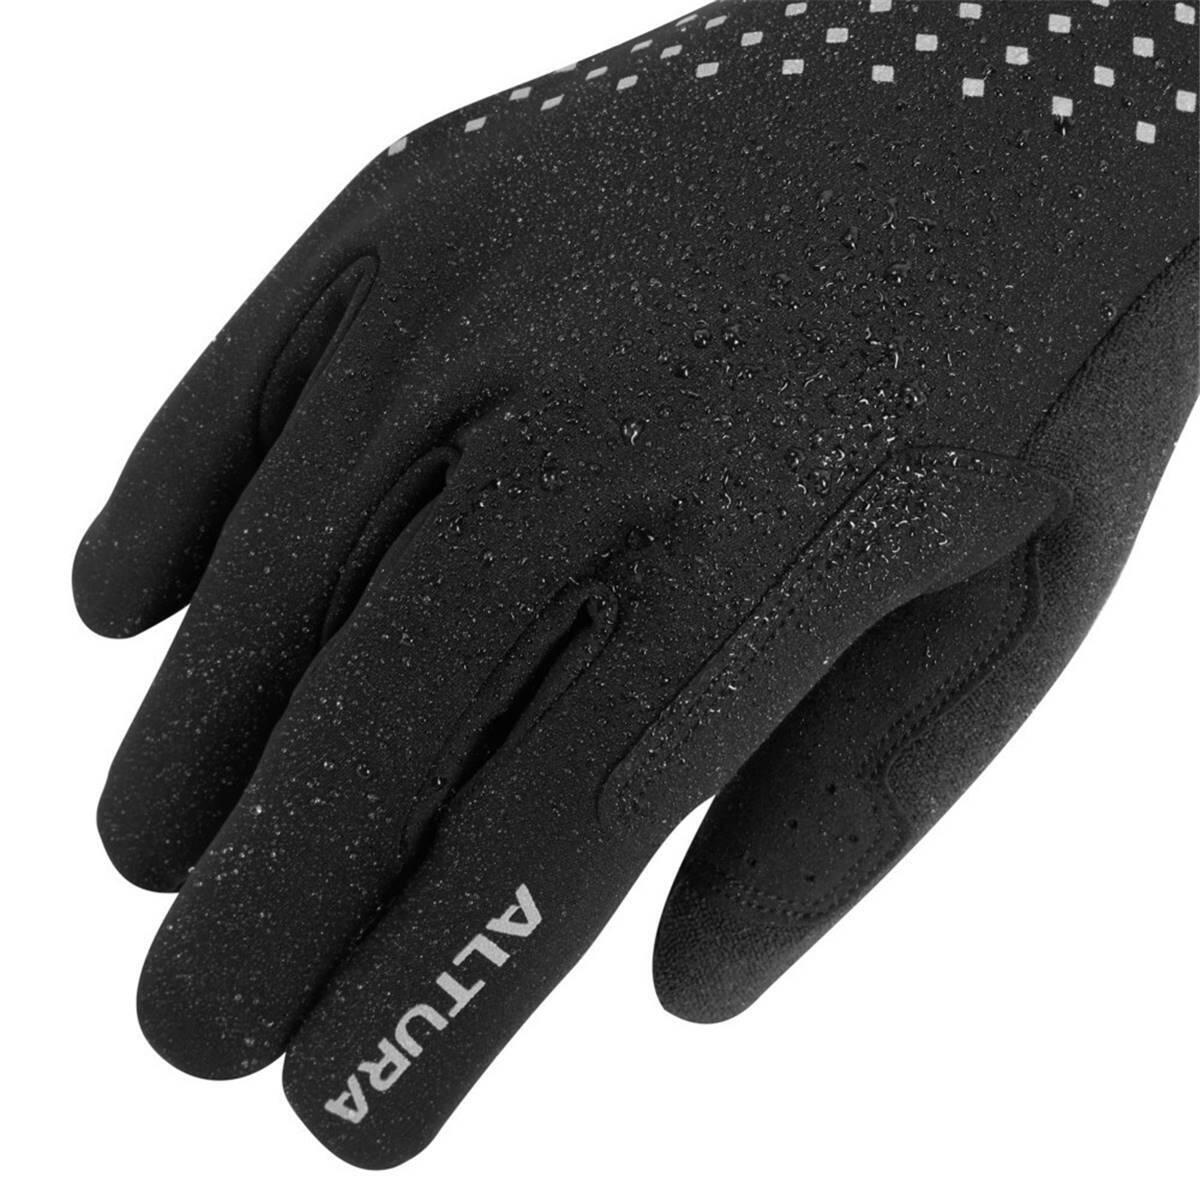 Nightvision Unisex Windproof Fleece Cycling Gloves 7/7